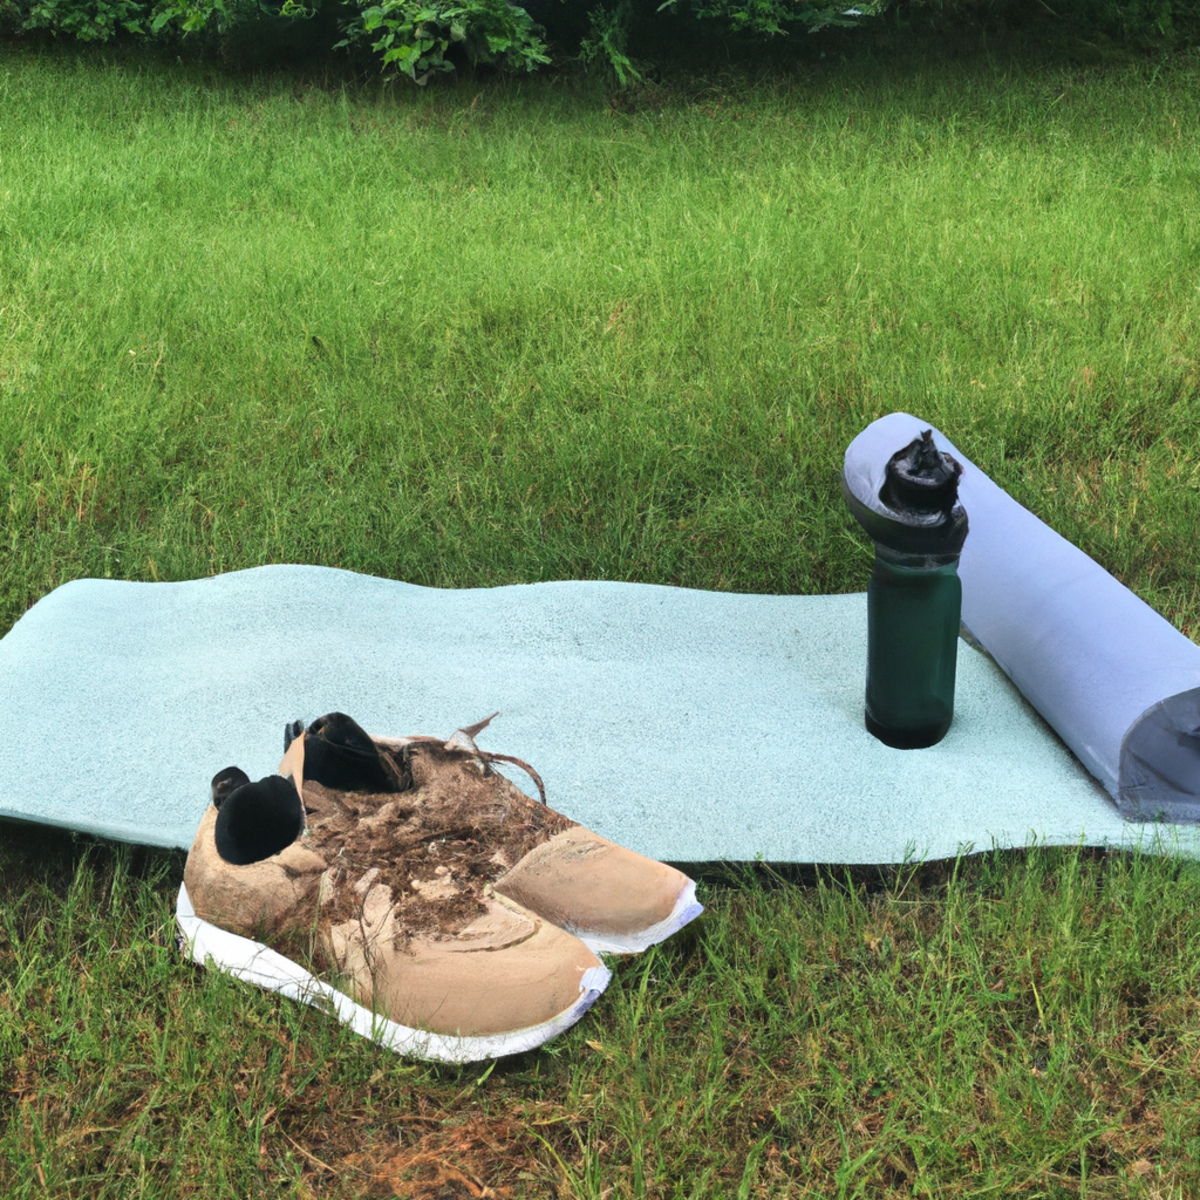 Yoga mat, water bottle, towel, and running shoes on green lawn. Encourages exercise for stress management.